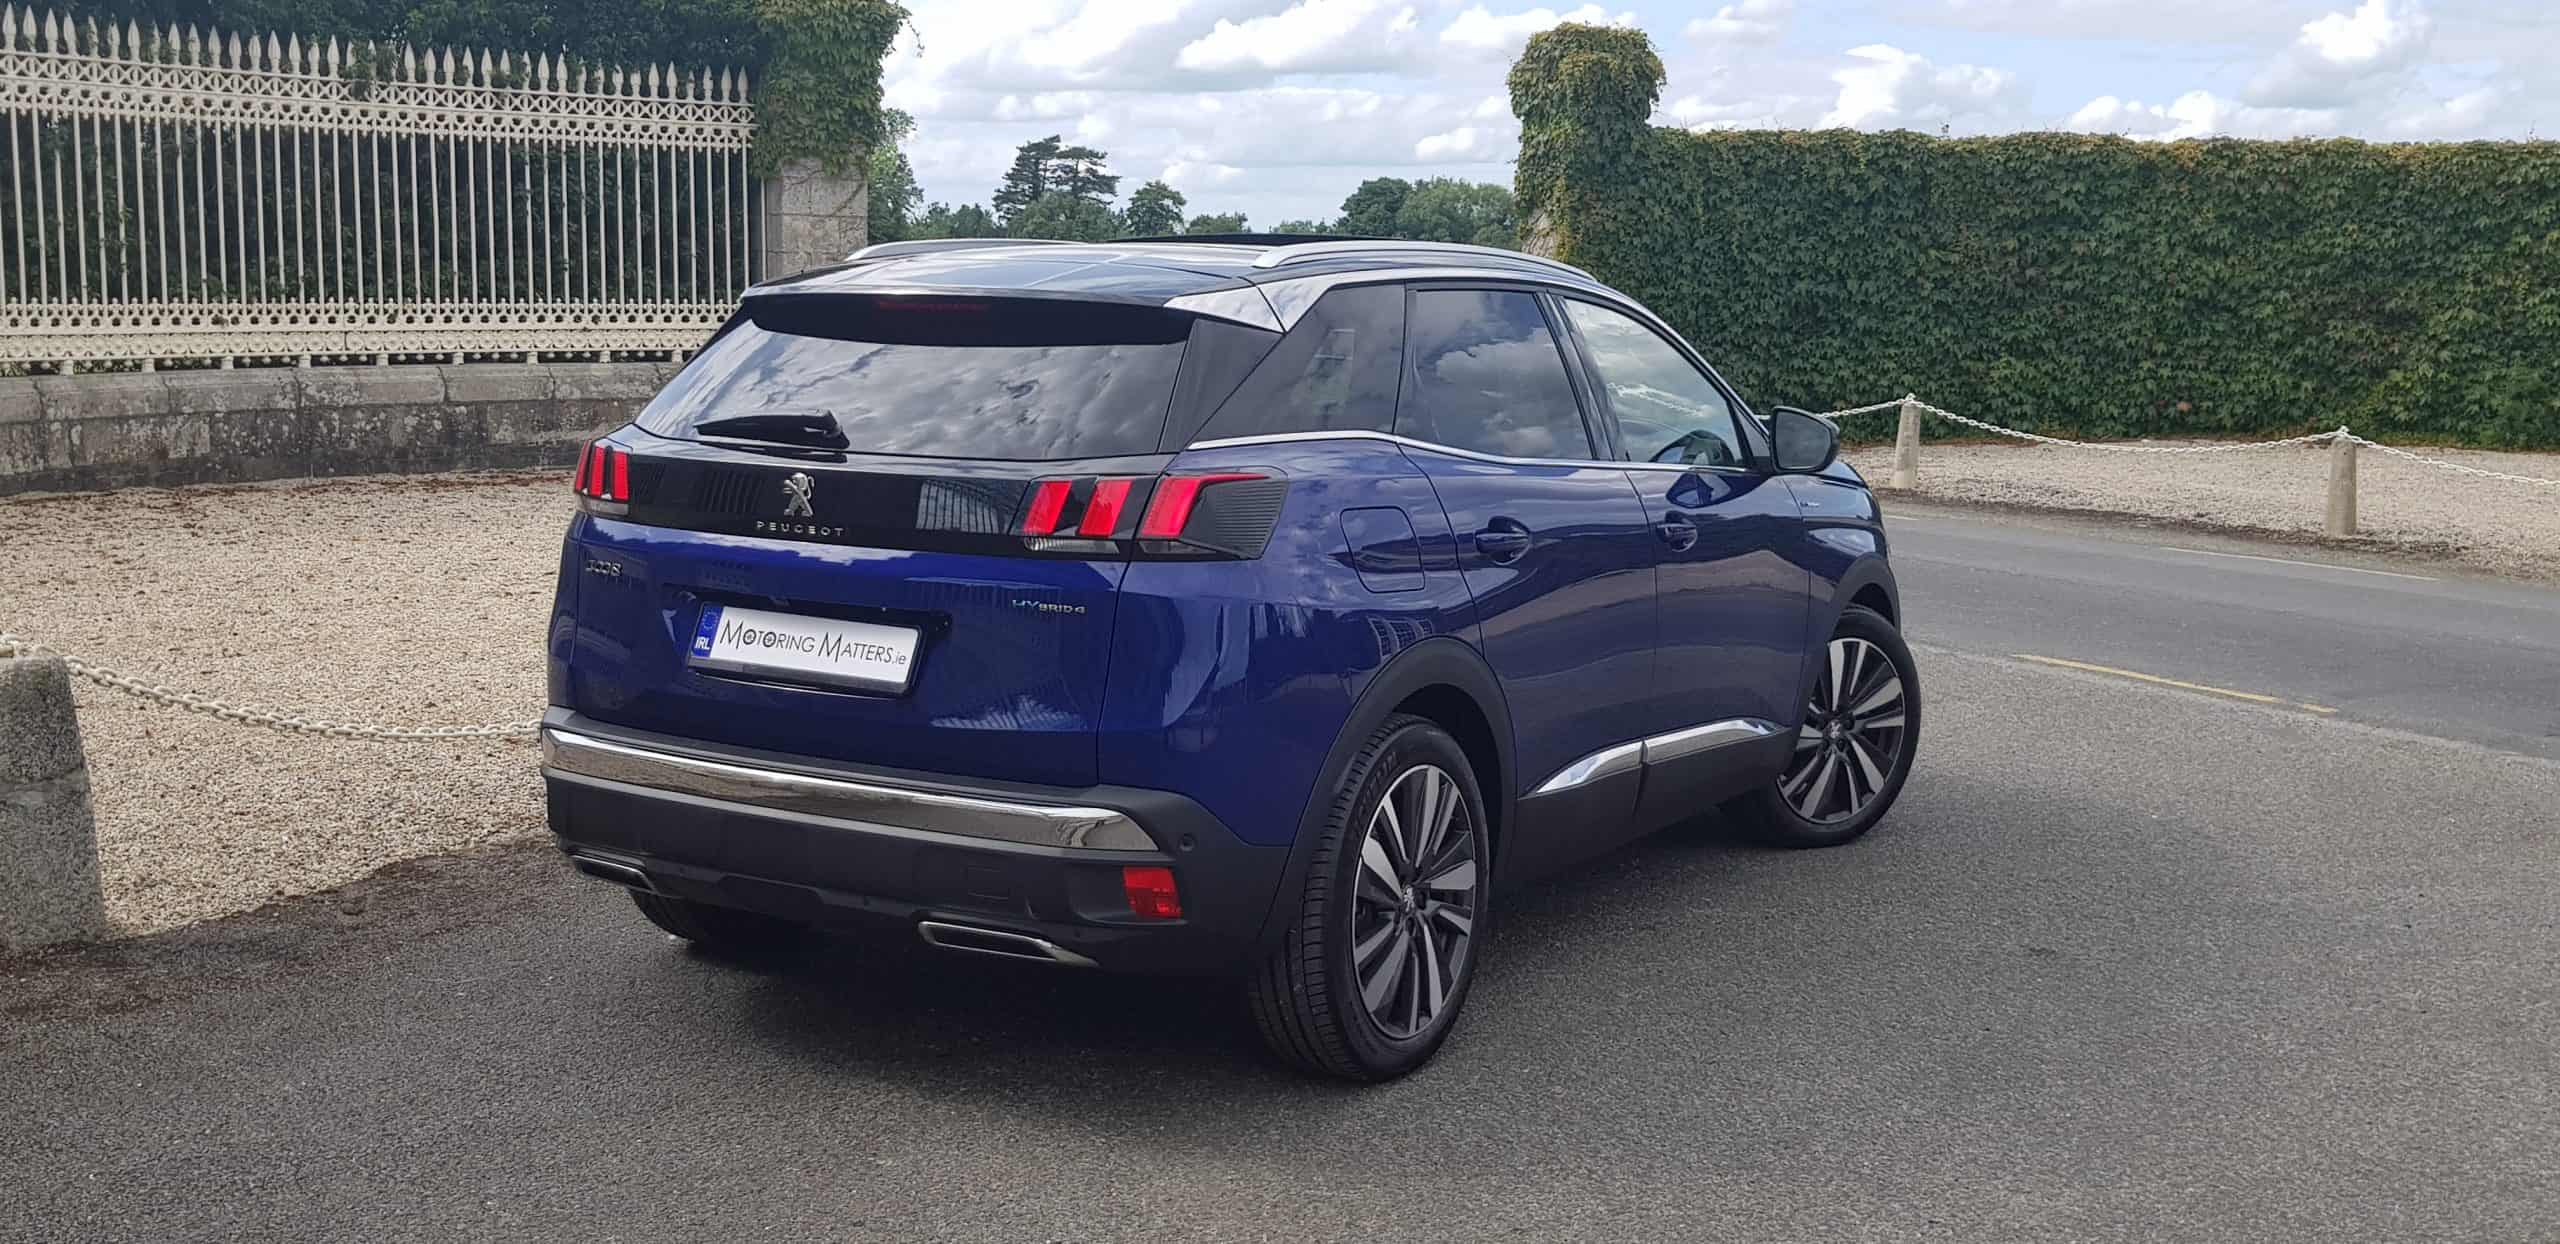 New Peugeot 3008 PHEV AWD 300bhp Auto A Powerful